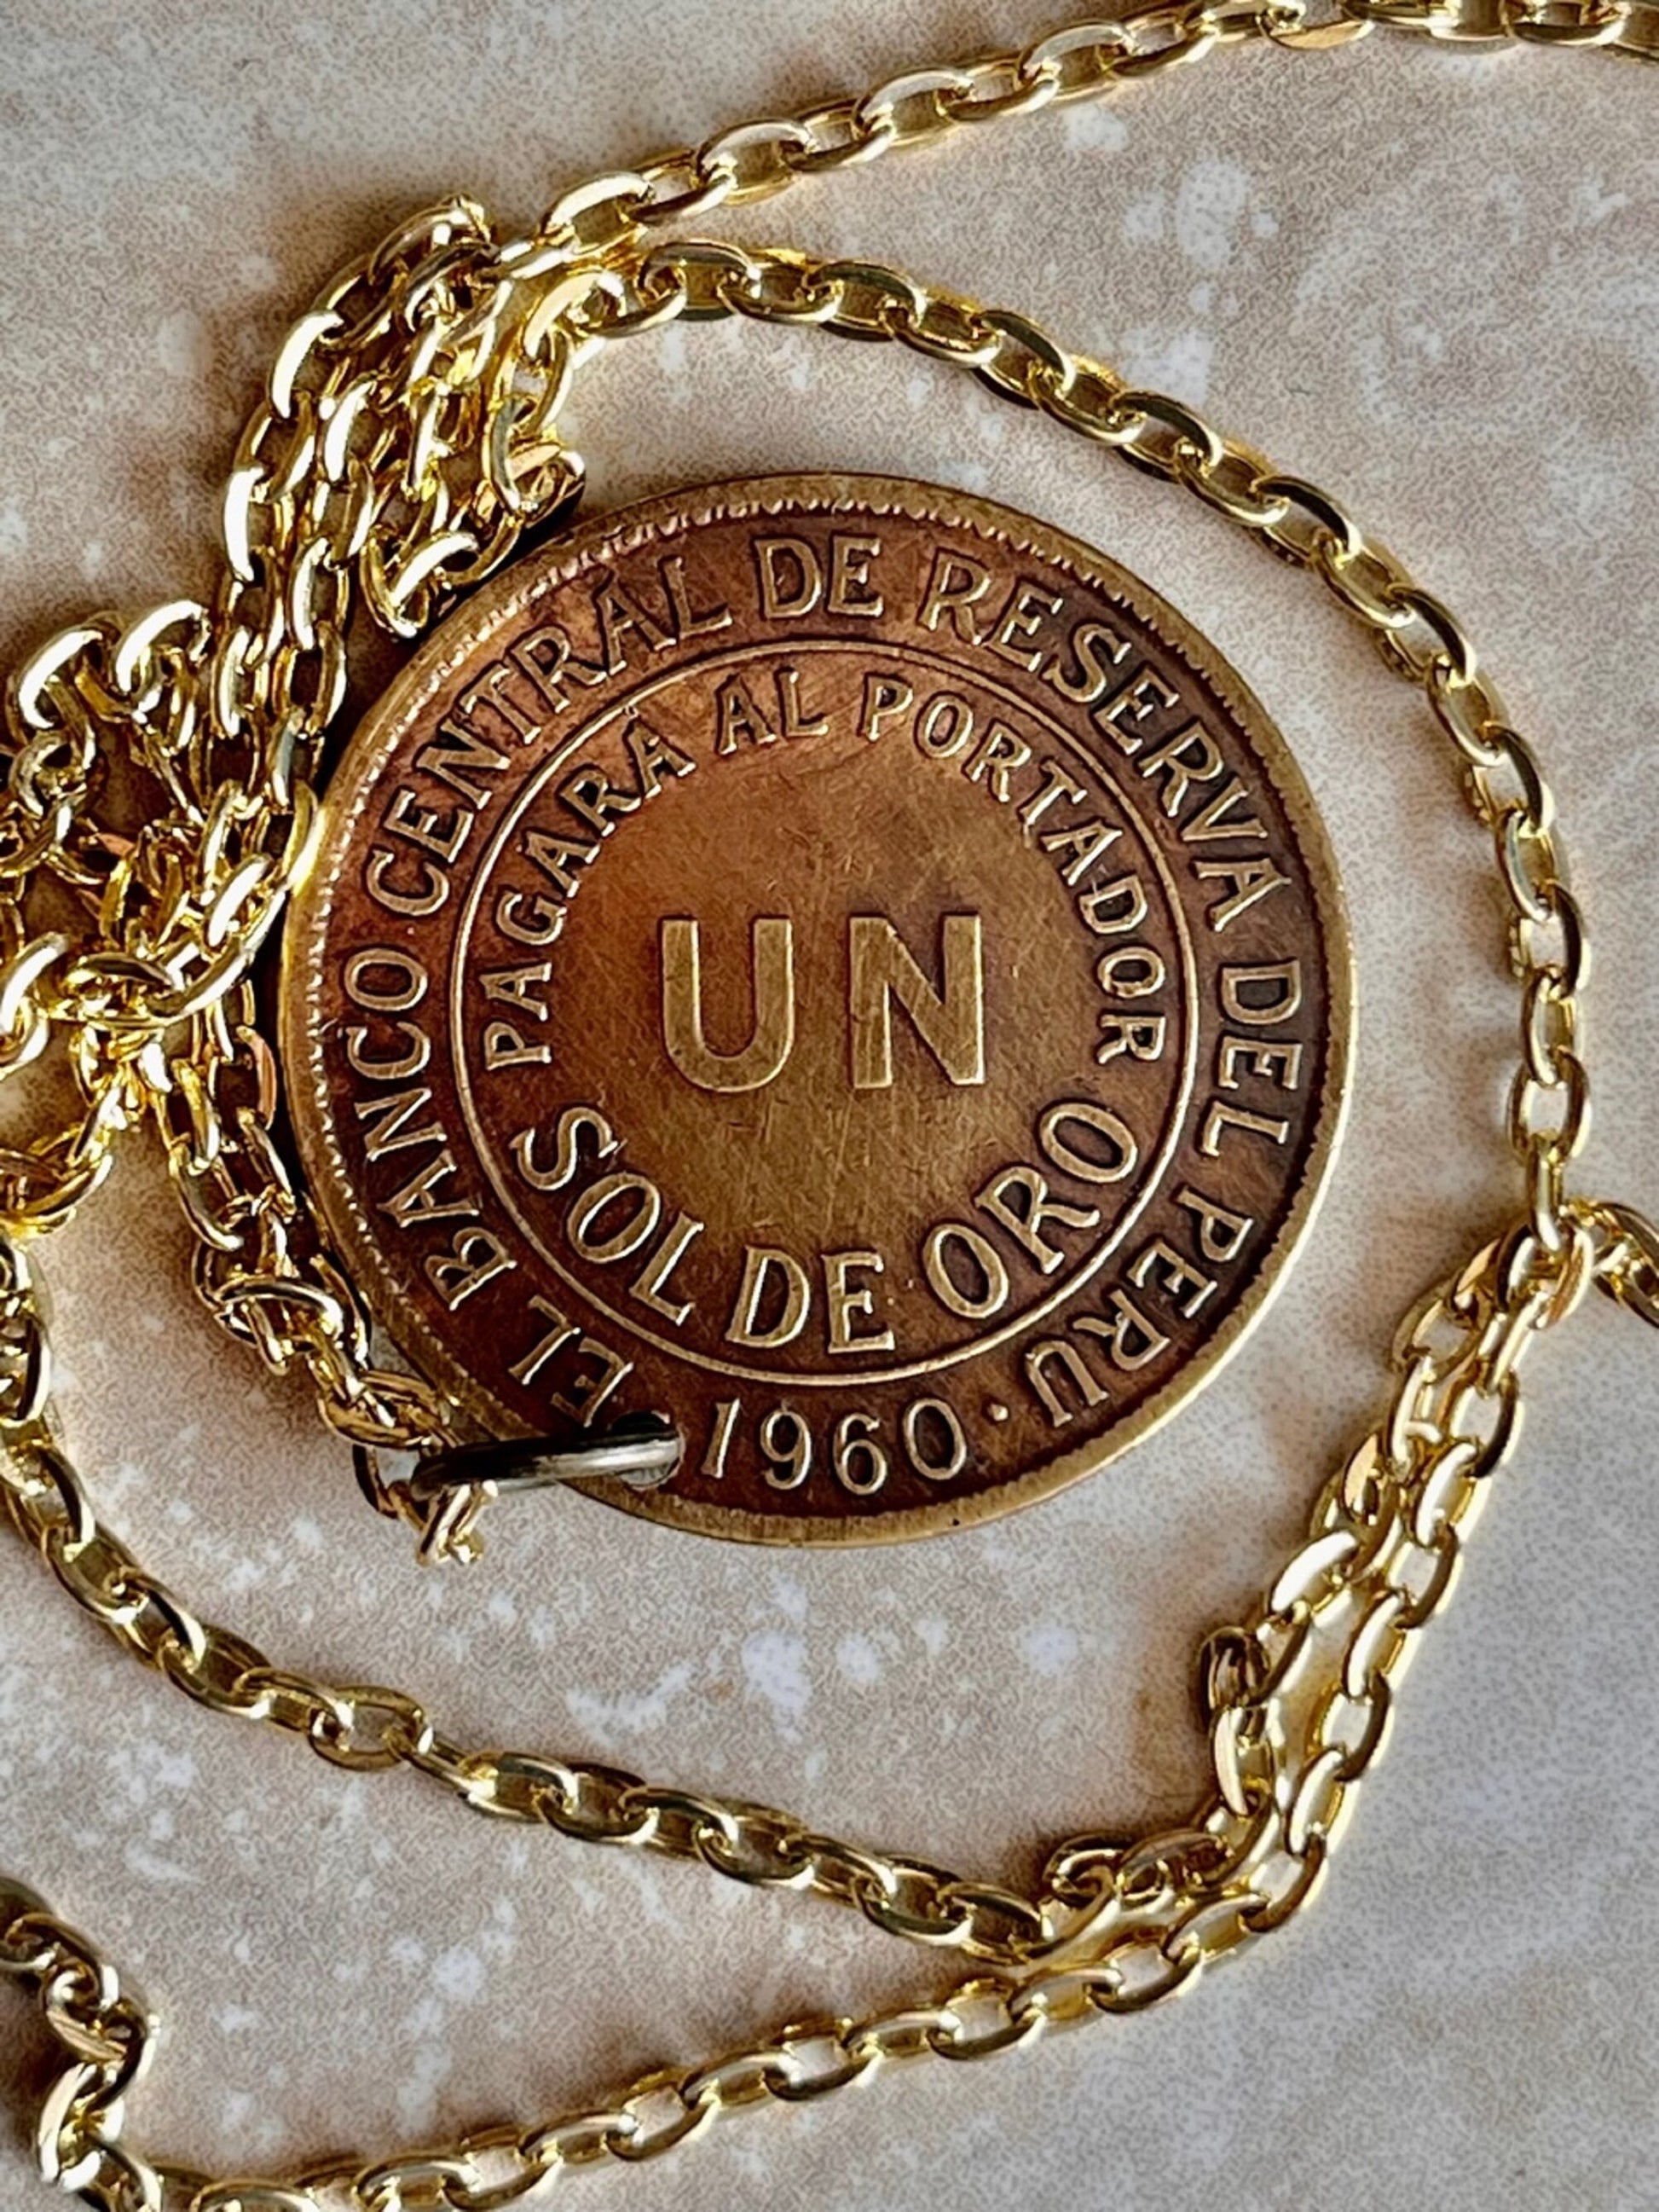 Peru Coin Pendant Peruvian UN SOL De Oro Personal Necklace Old Vintage Handmade Jewelry Gift Friend Charm For Him Her World Coin Collector